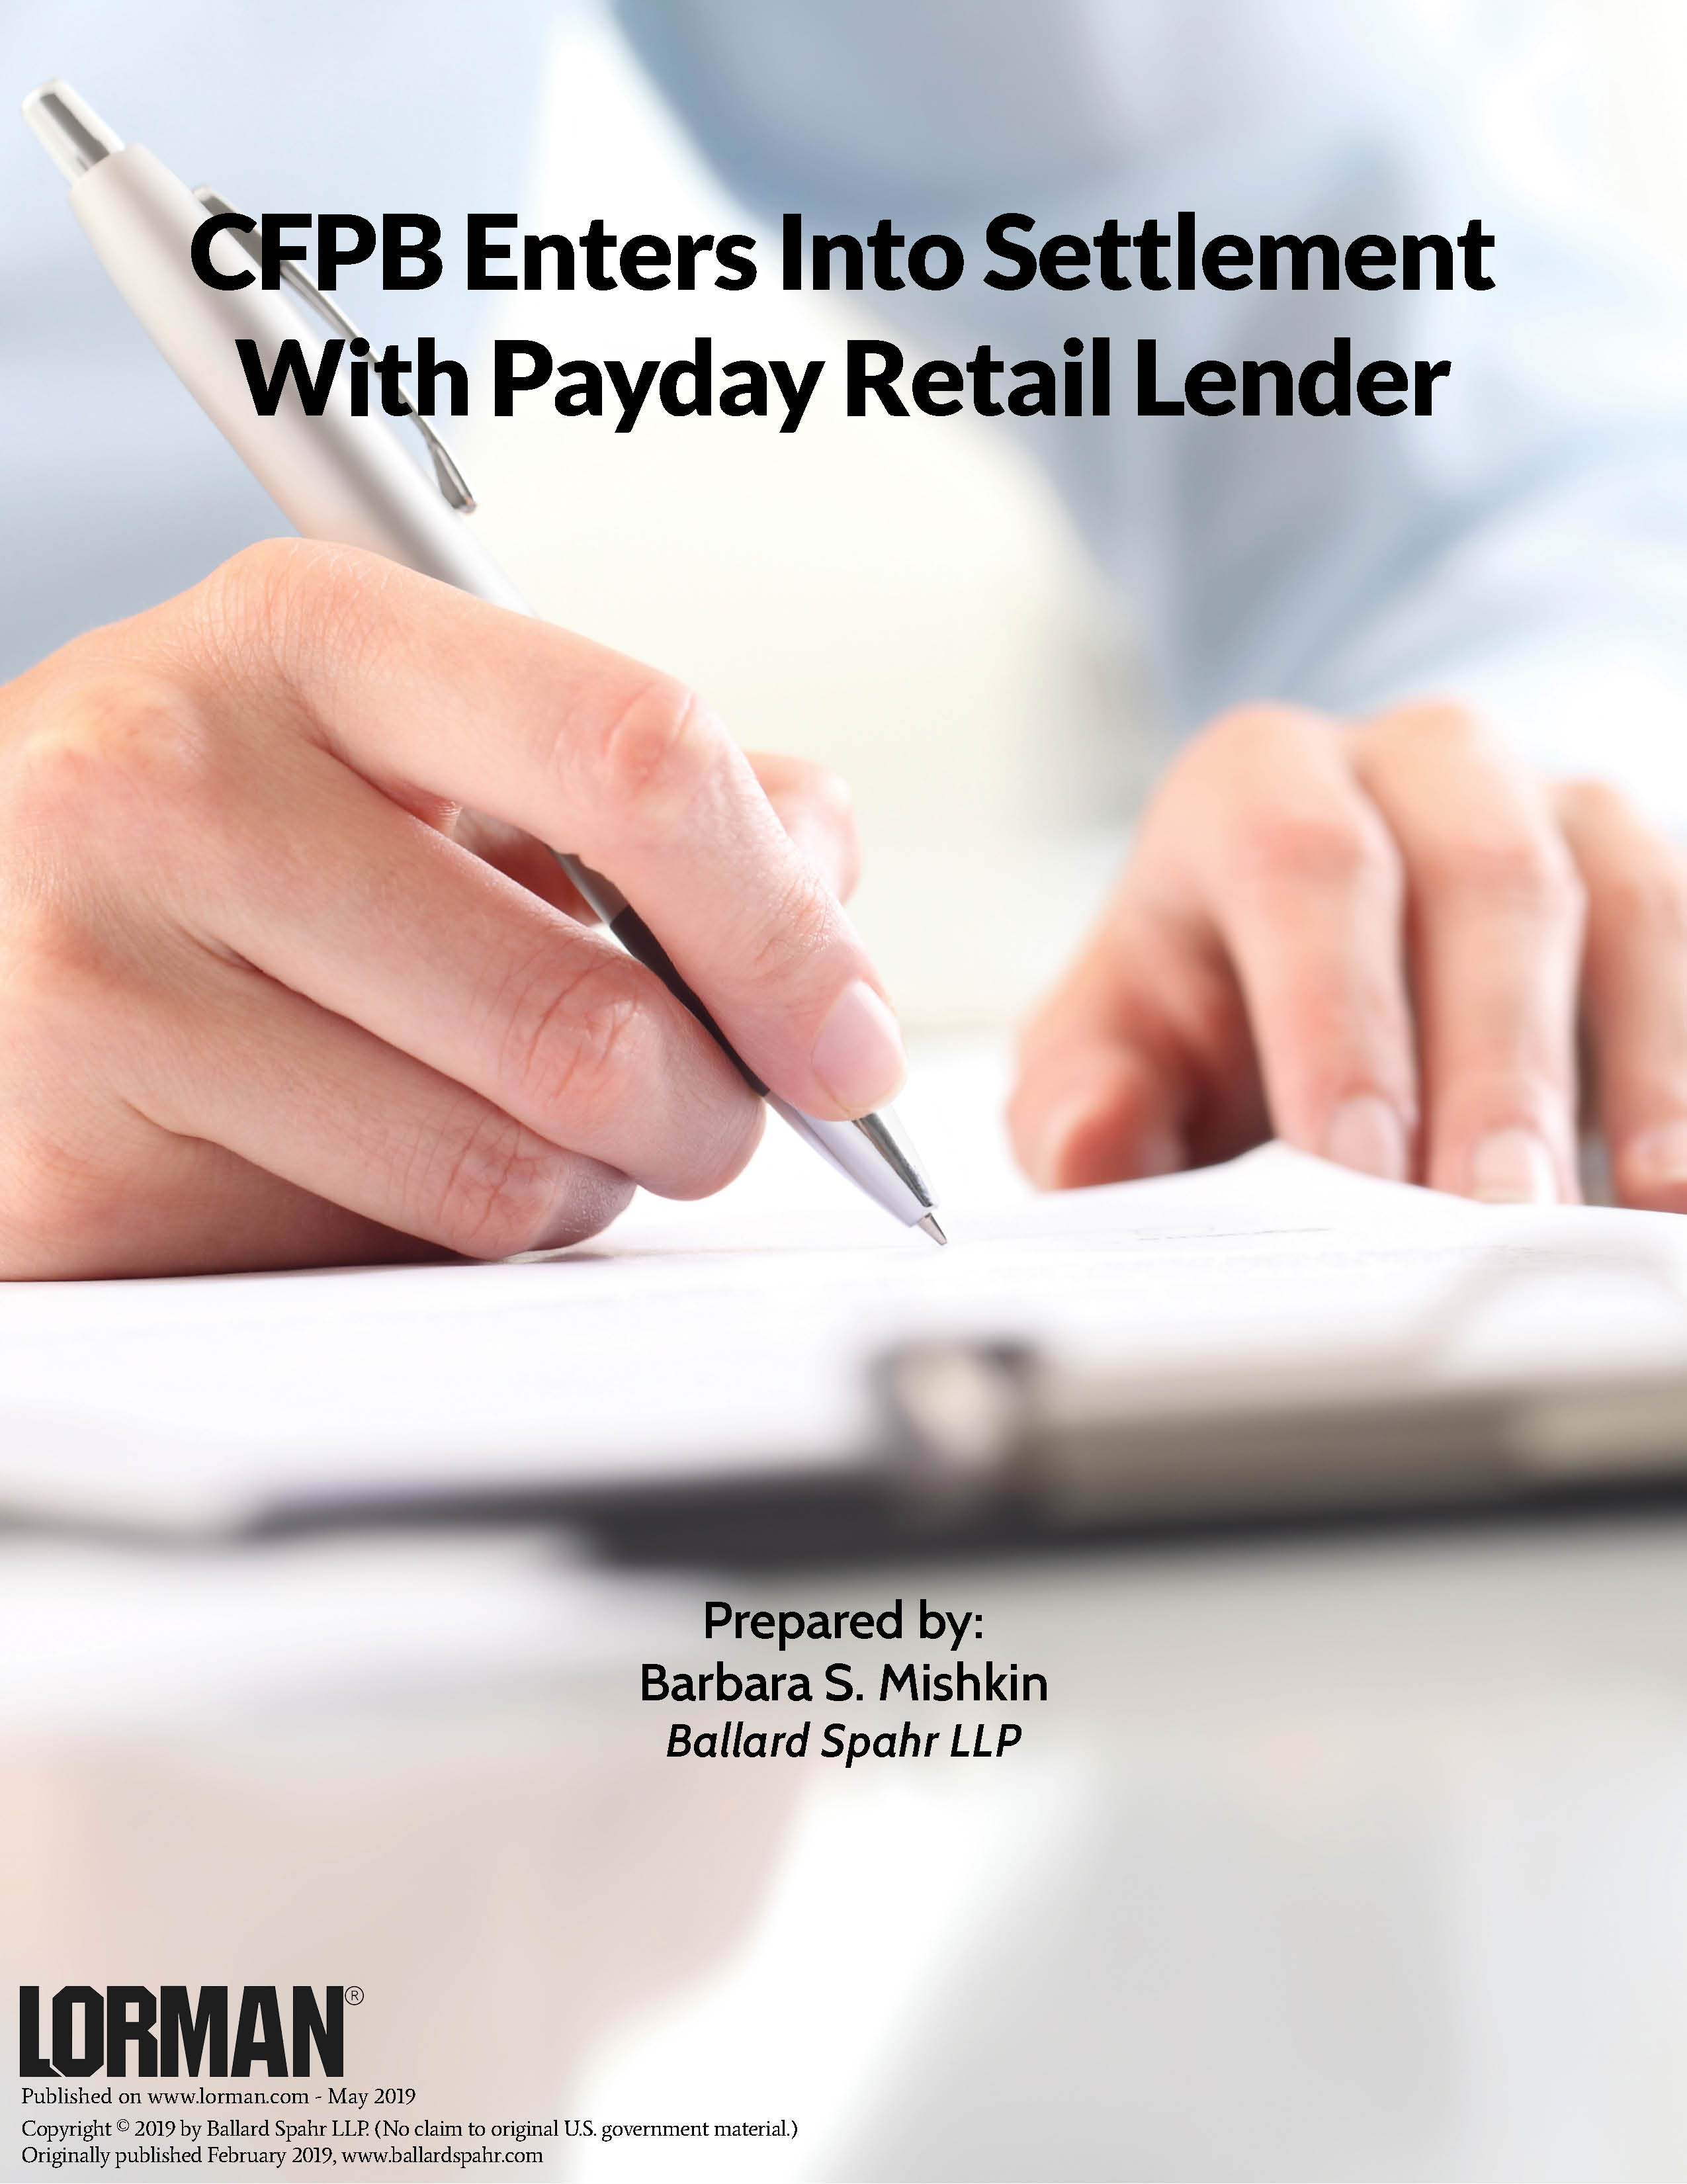 CFPB Enters Into Settlement With Payday Retail Lender